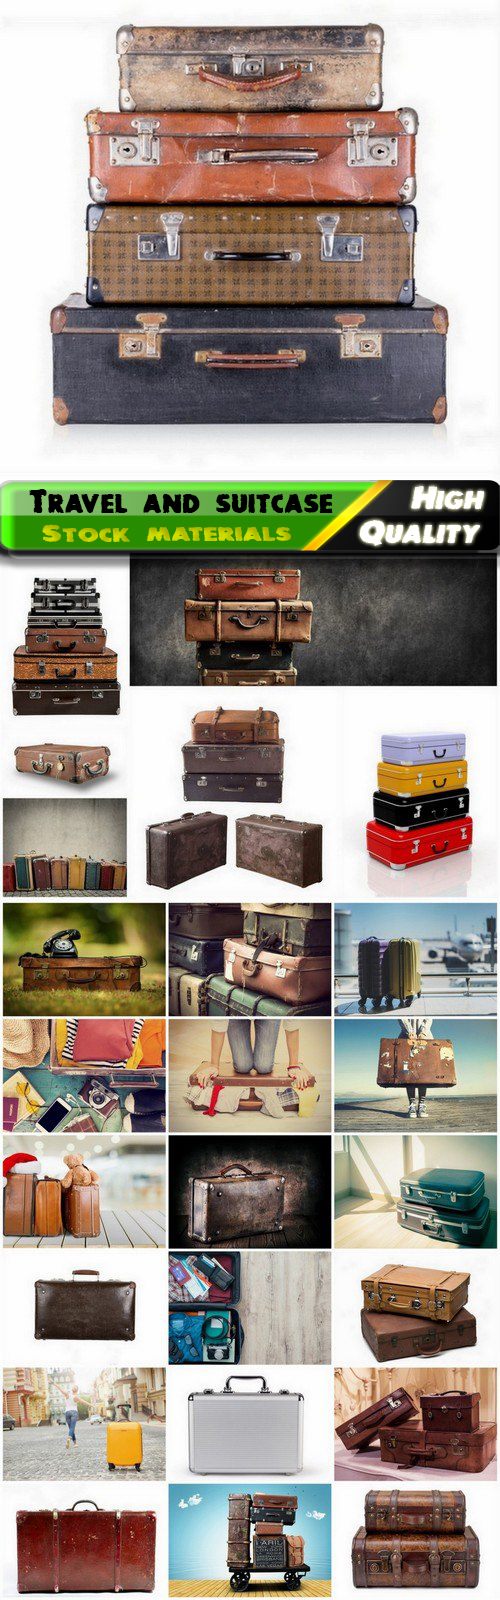 Travel vacation and suitcase with clothes 25 HQ Jpg